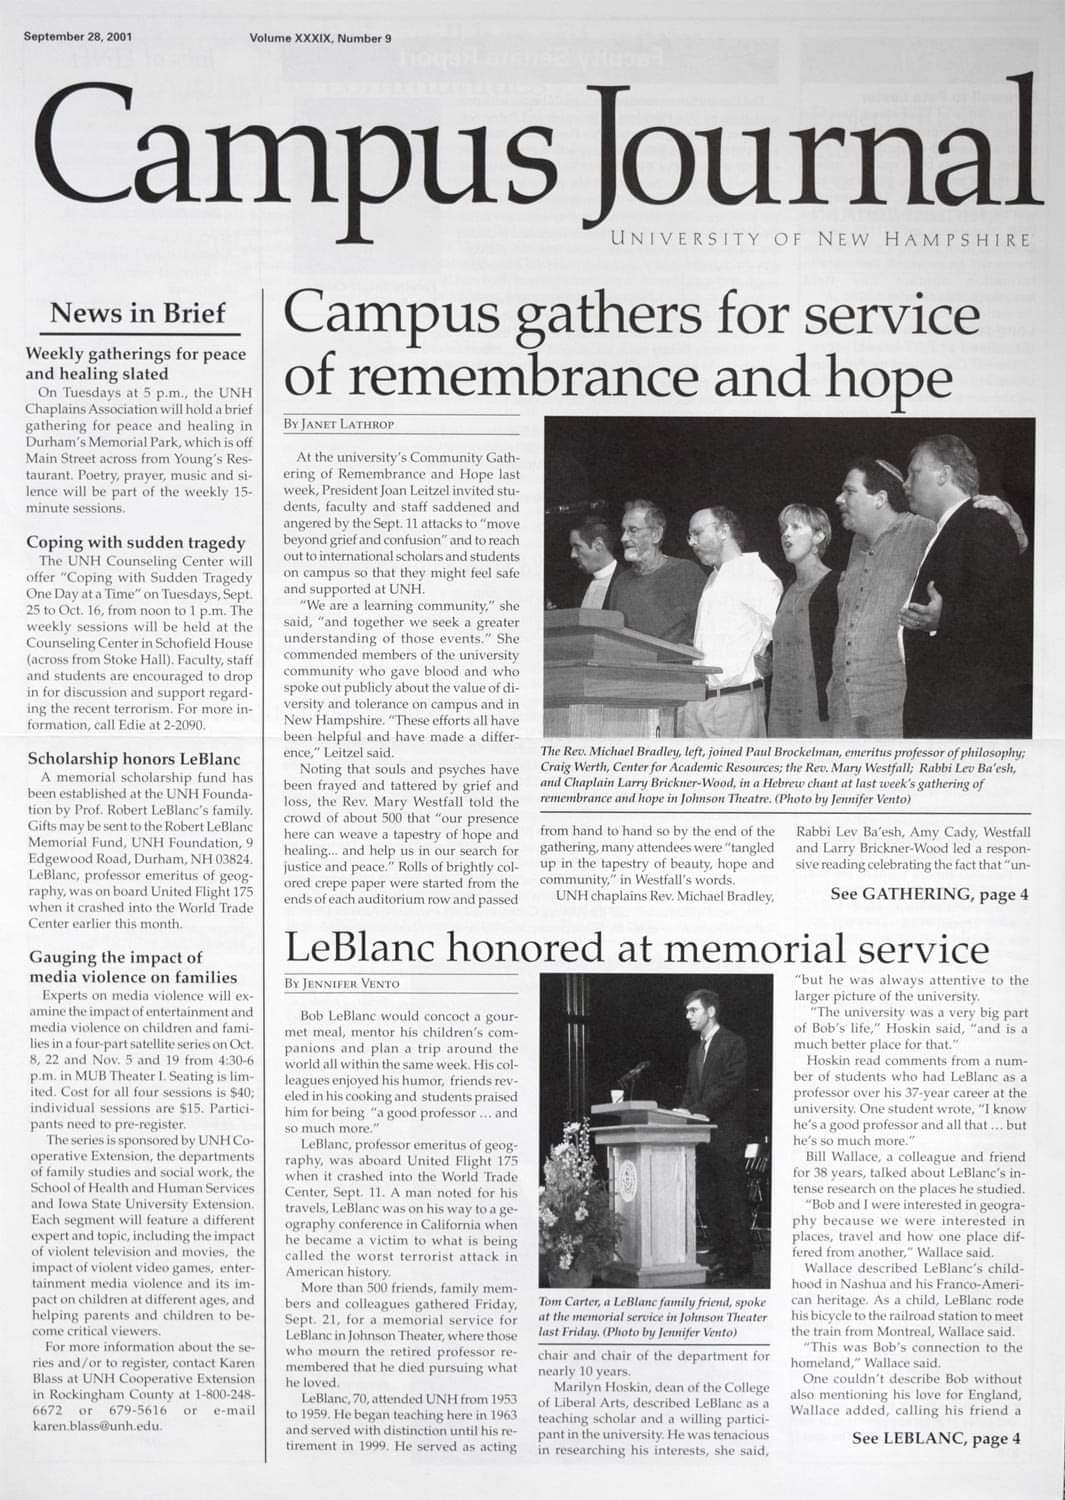 cover of the Campus Journal from September 28, 2001